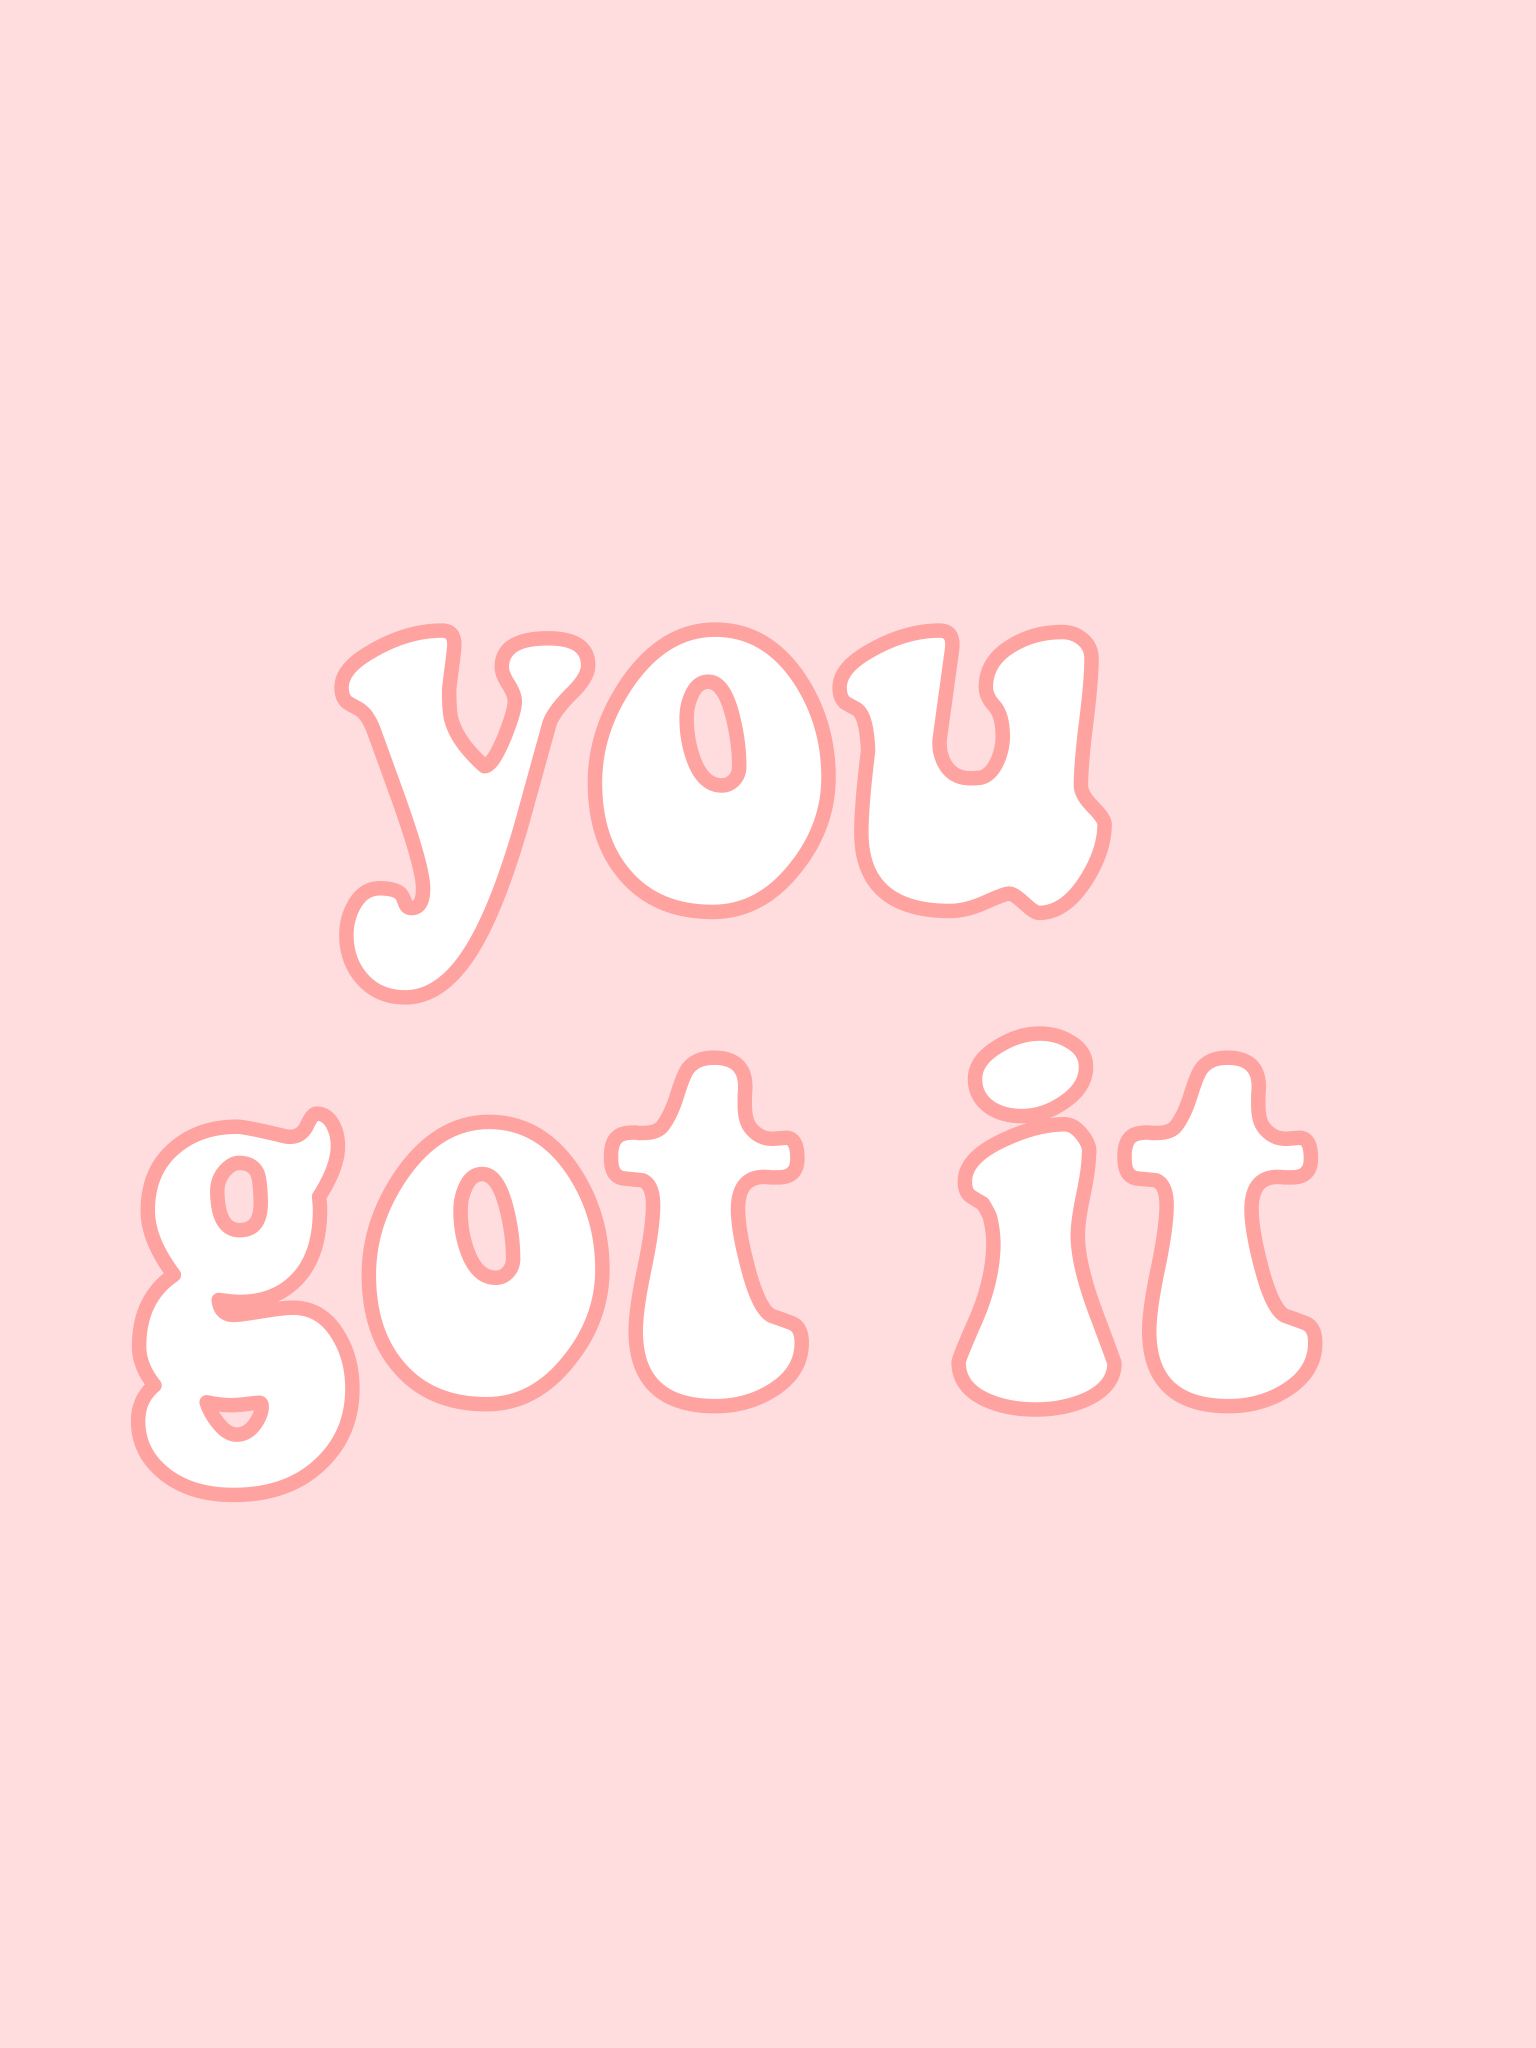 you got it quote words pink aesthetic vsco artsy tumblr iphone